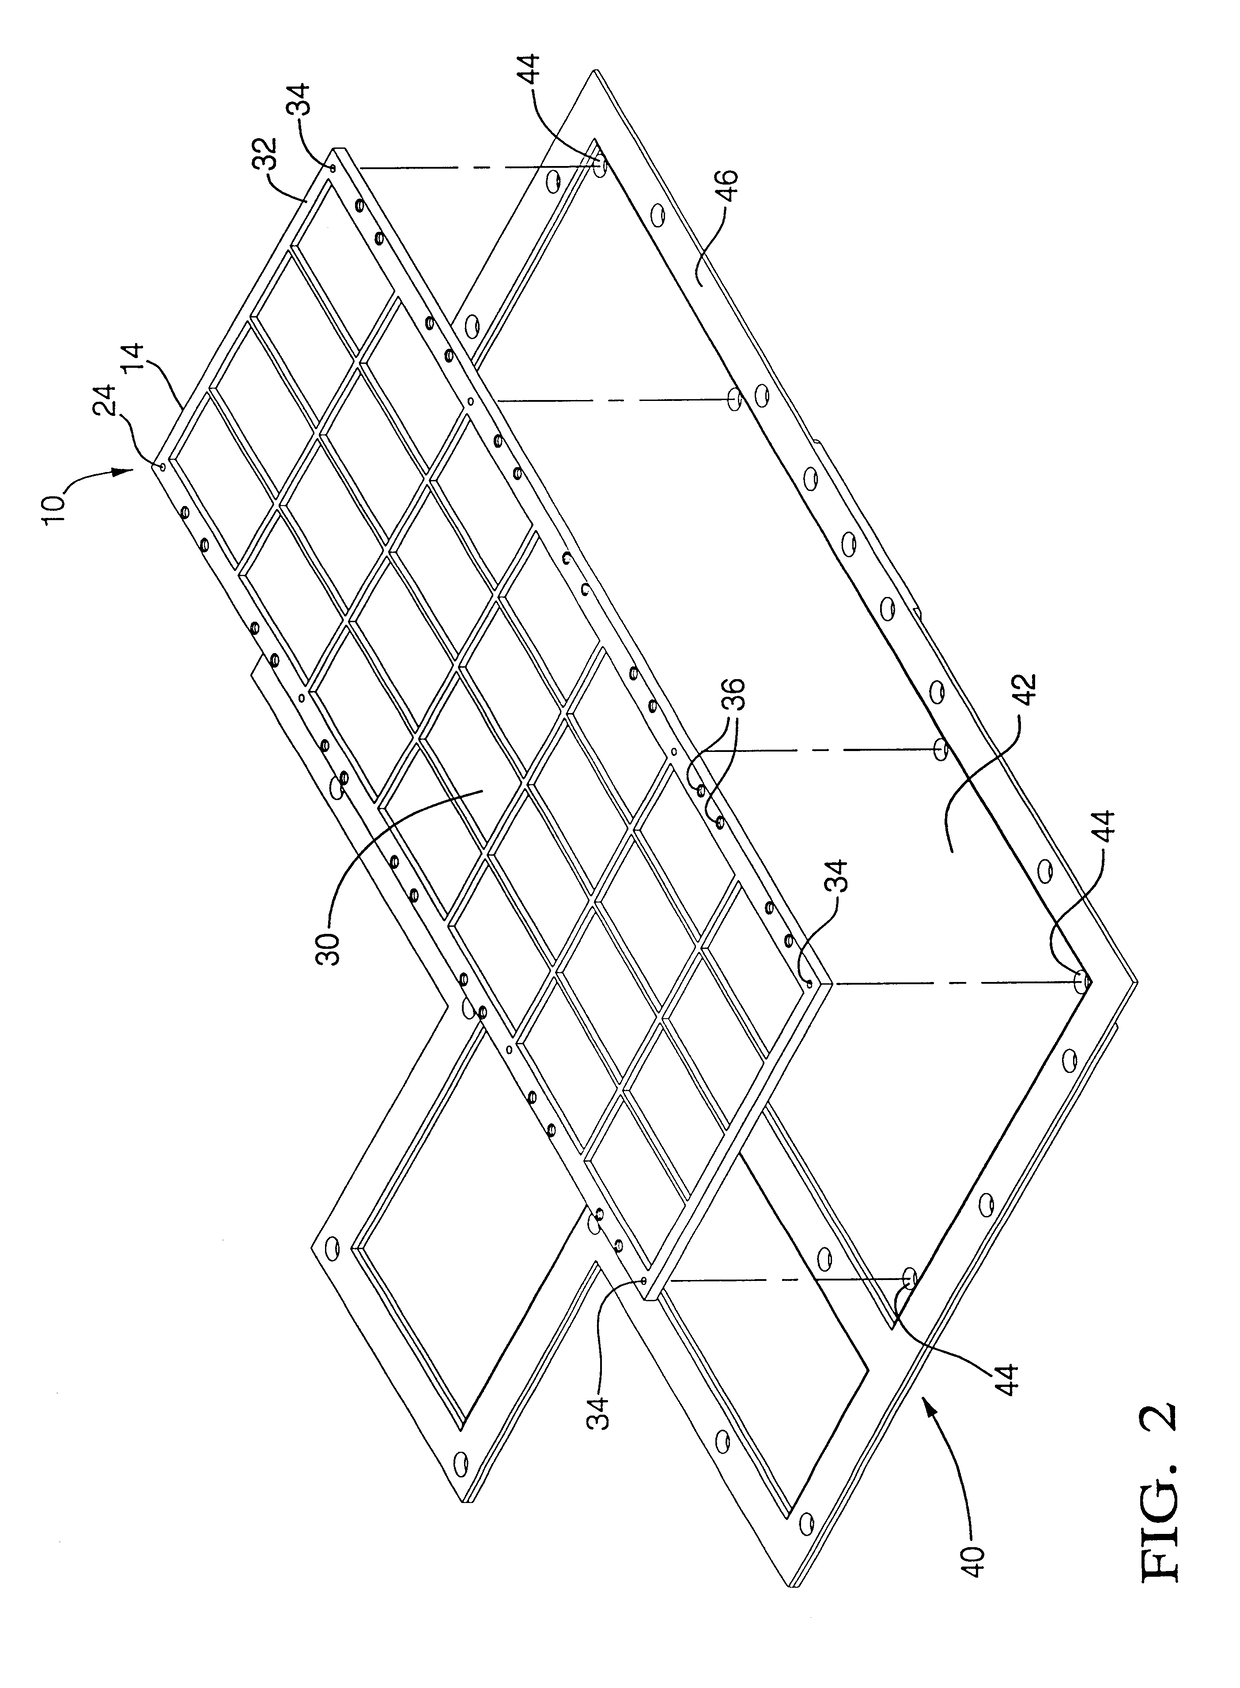 System of retaining a plurality of batteries for an electric/hybrid vehicle